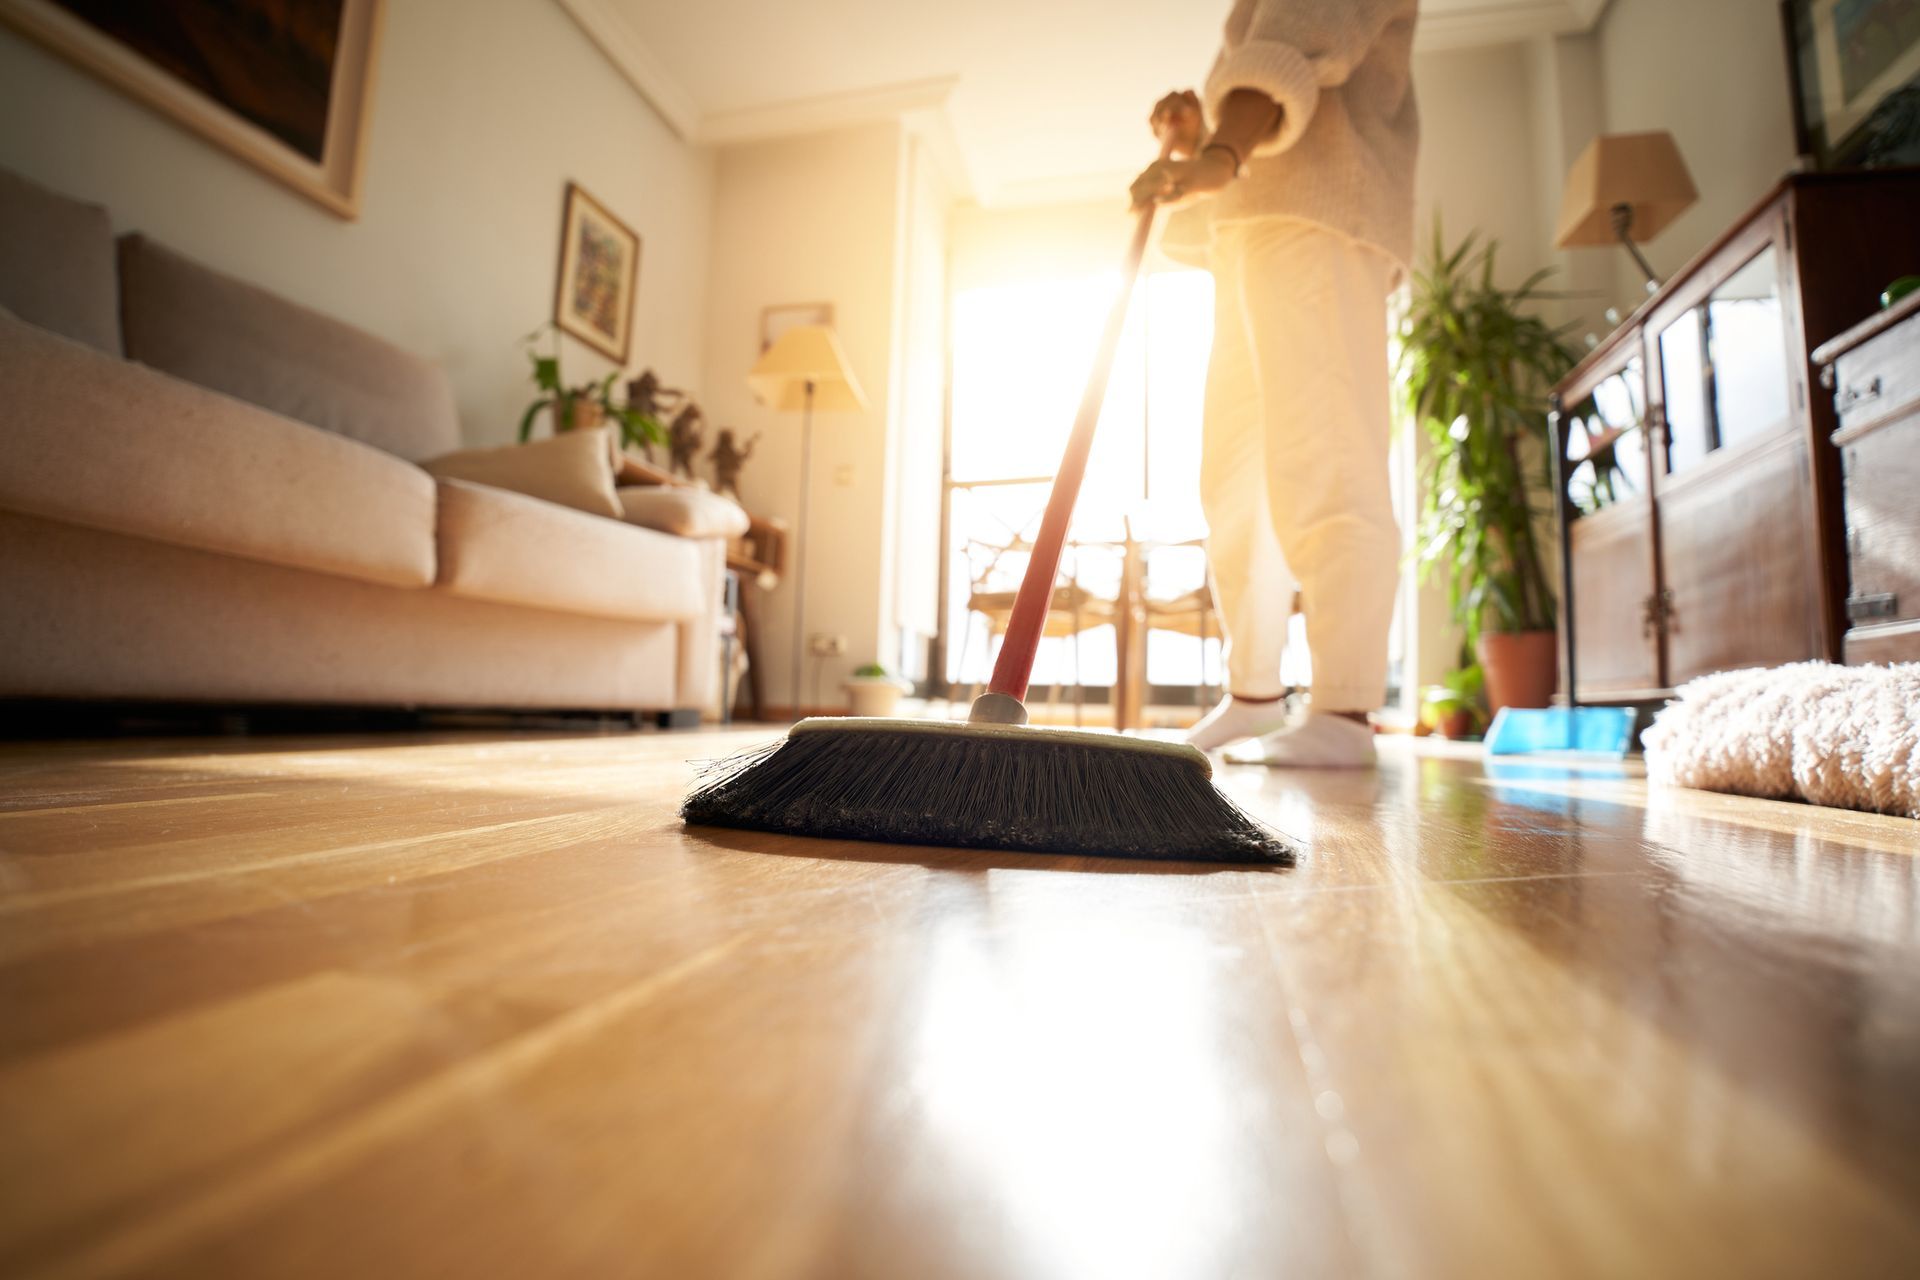 Floor Cleaning - Residential Cleaning service in Trenton, NJ